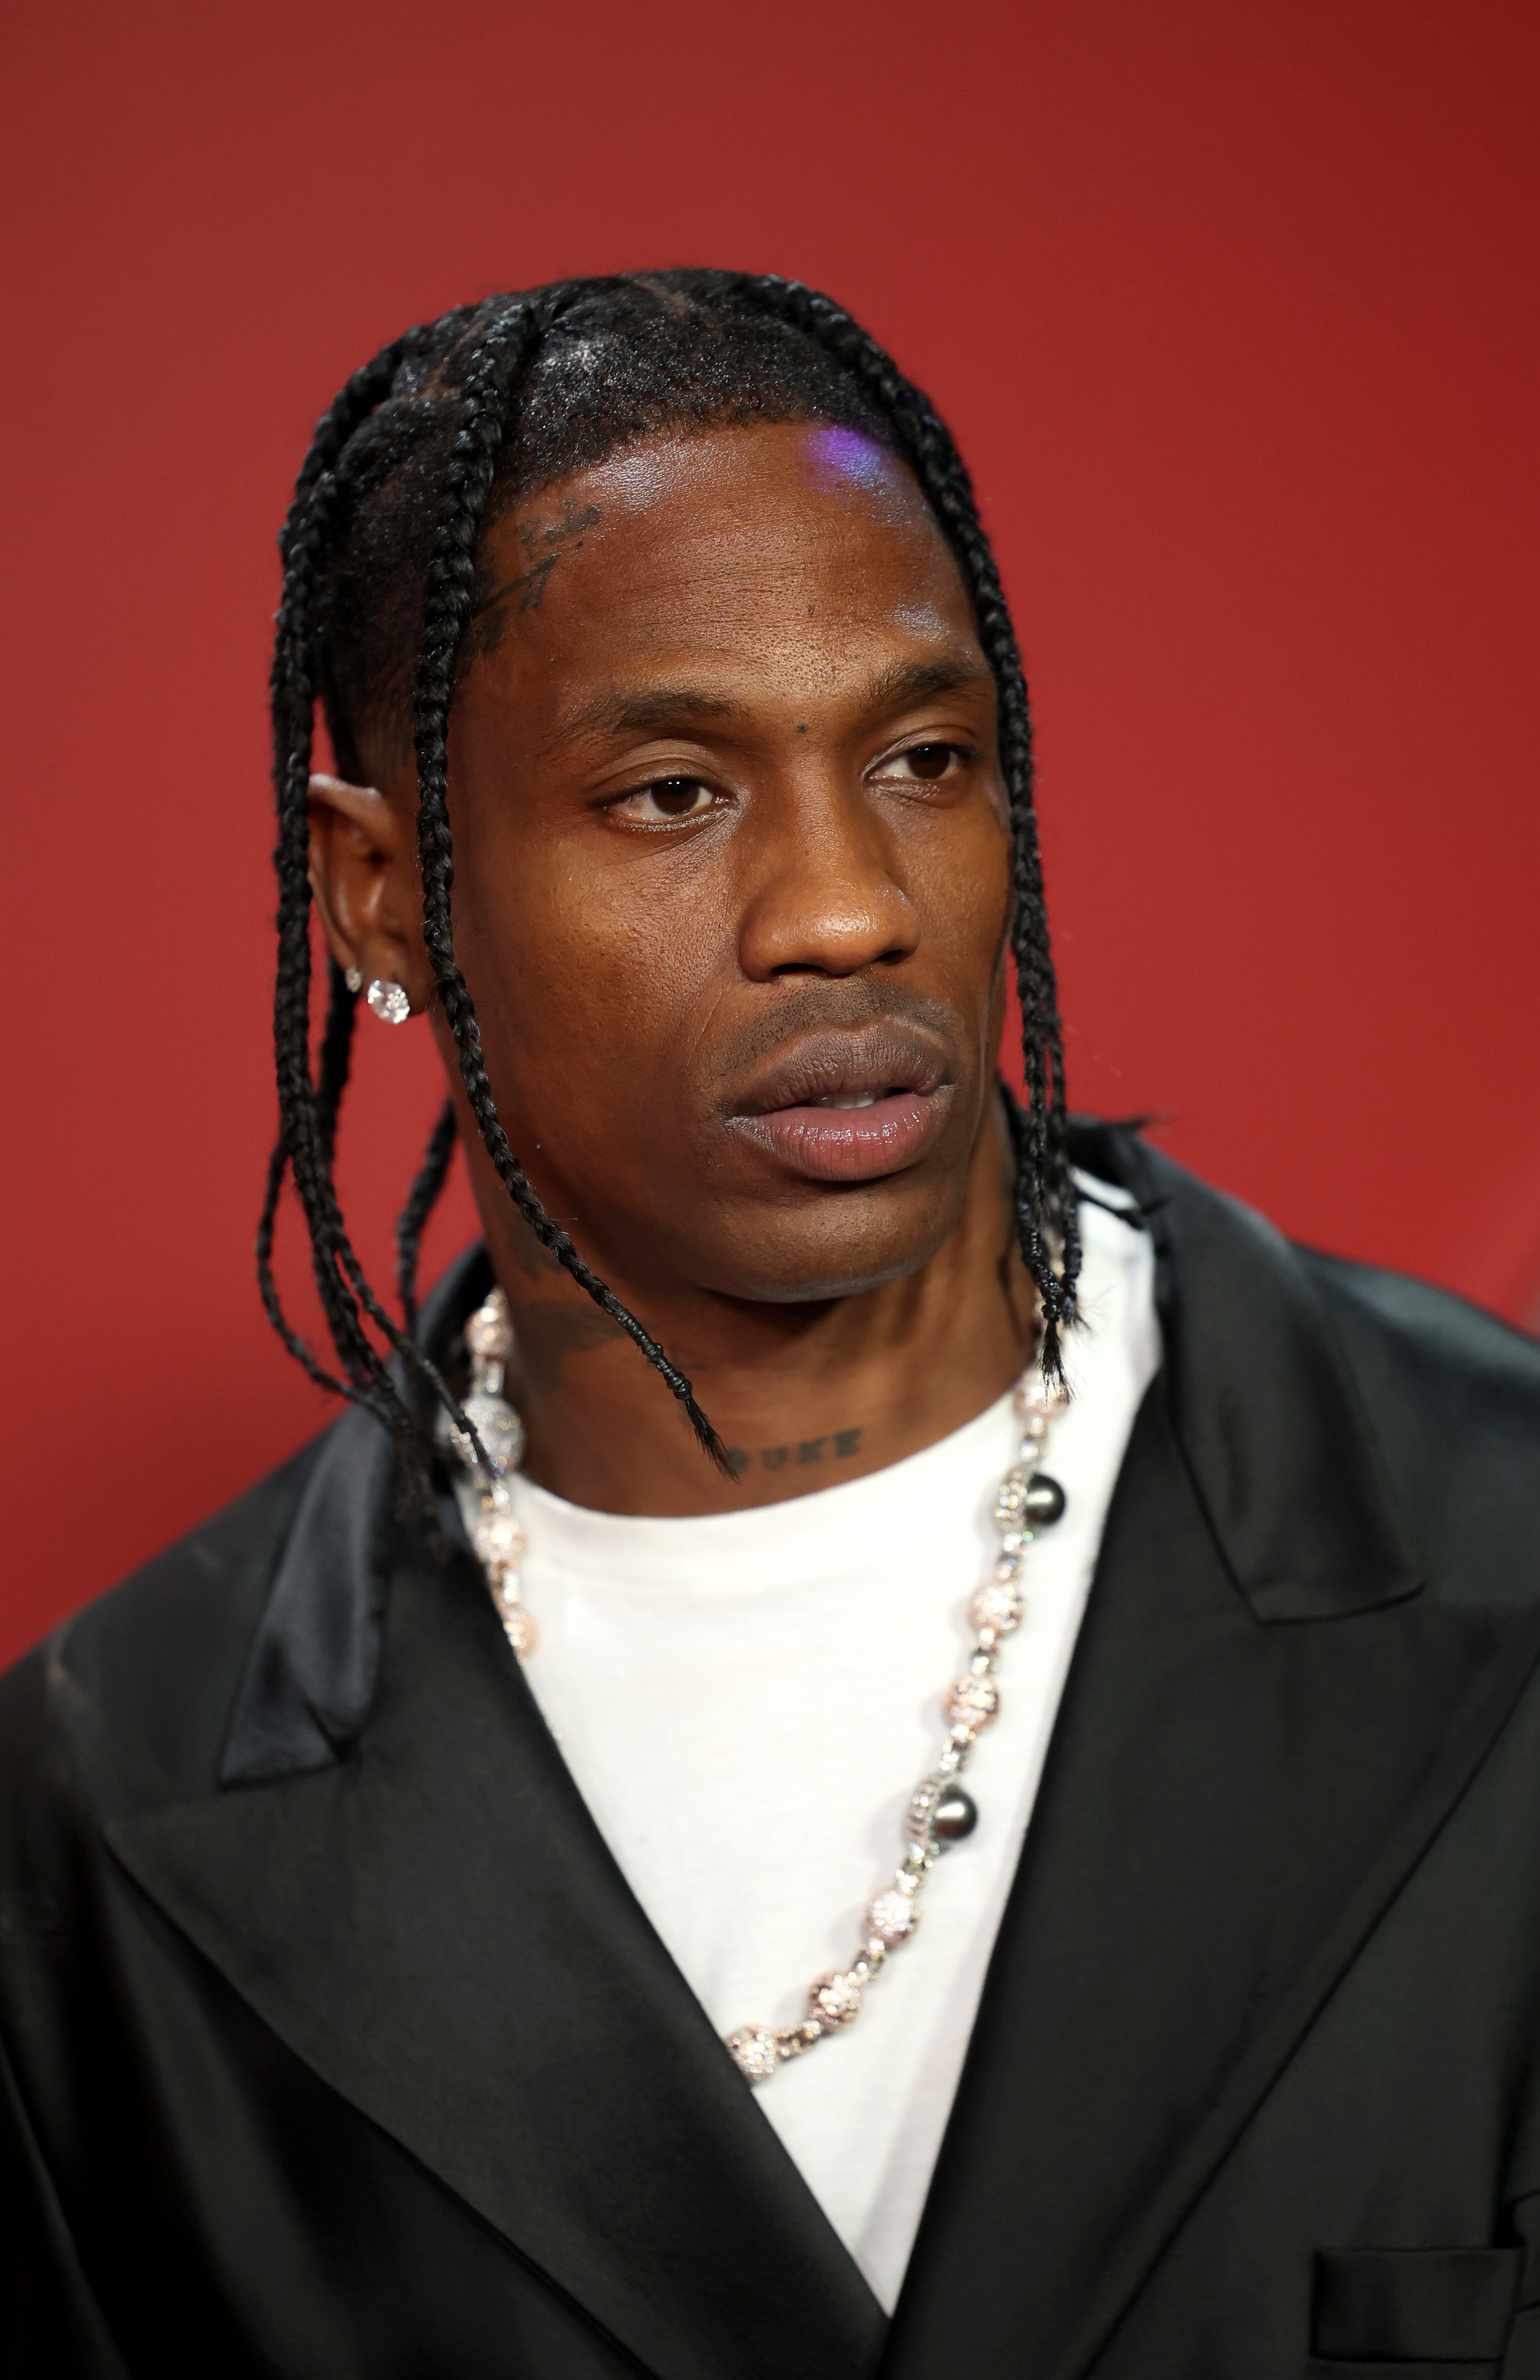 Travis Scott wearing a suit and silver necklace